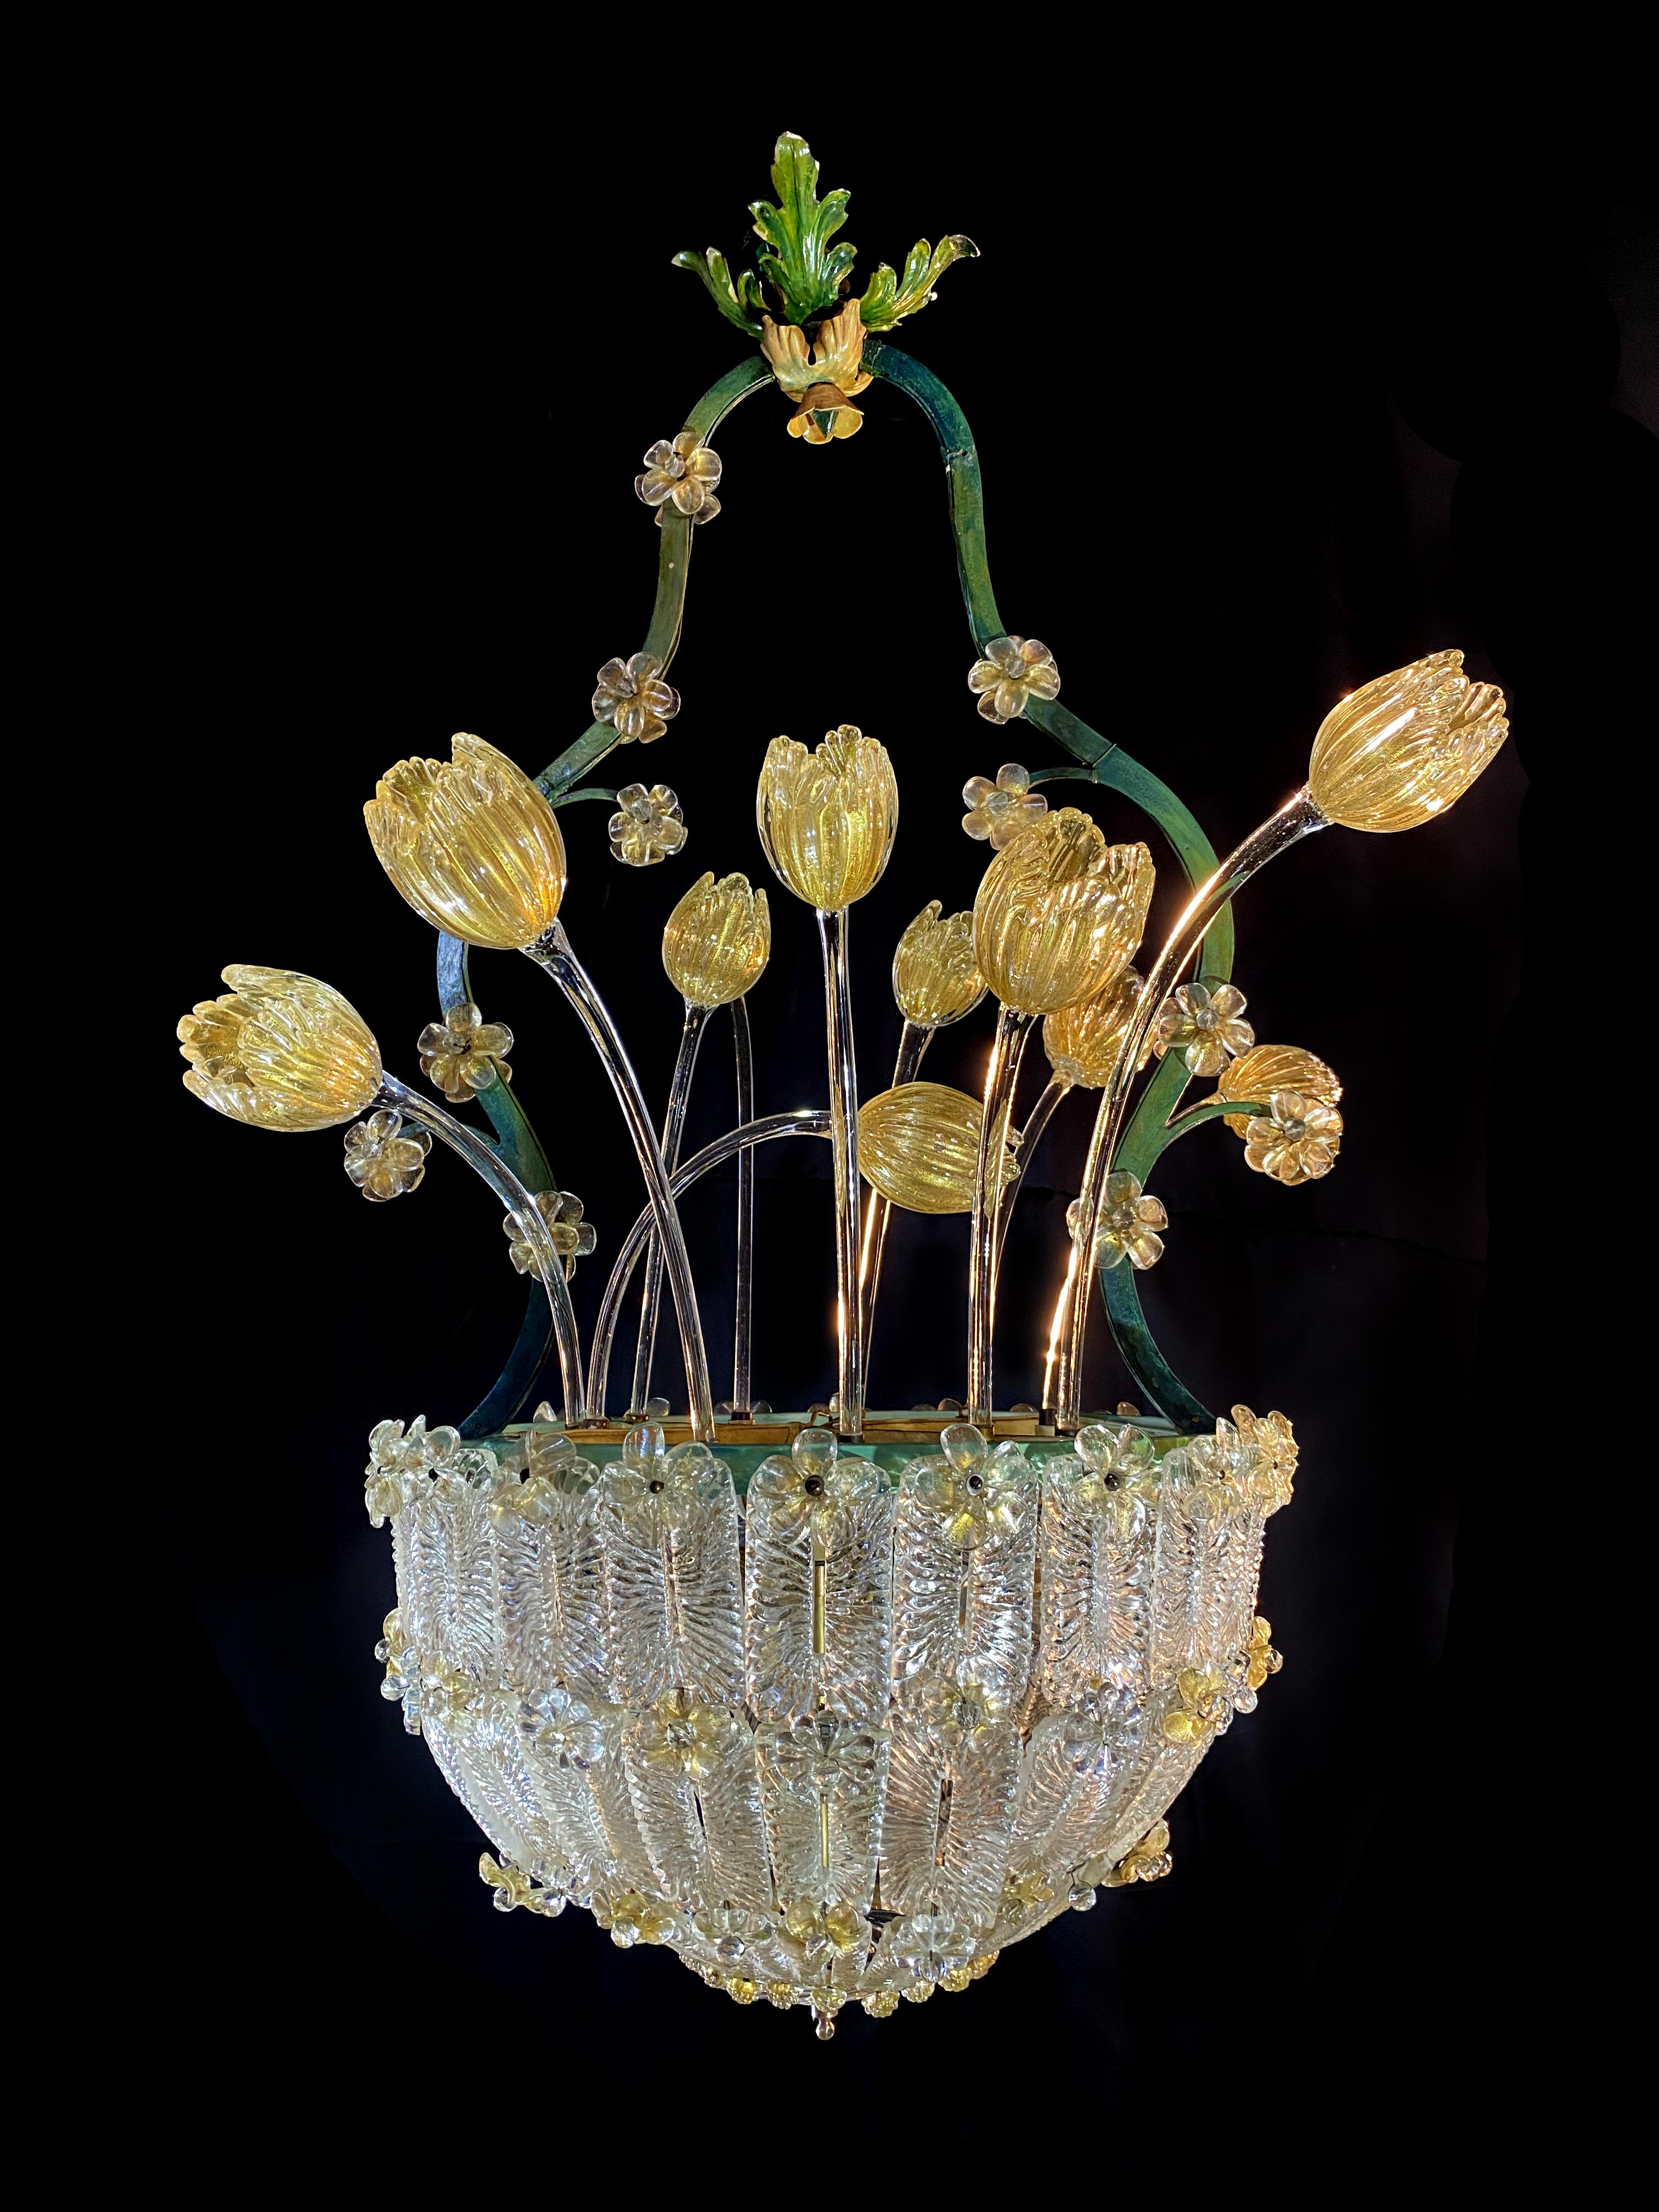 Amazing Glass Flower Chandelier with Gold Inclusions, Murano, 1950s For Sale 10